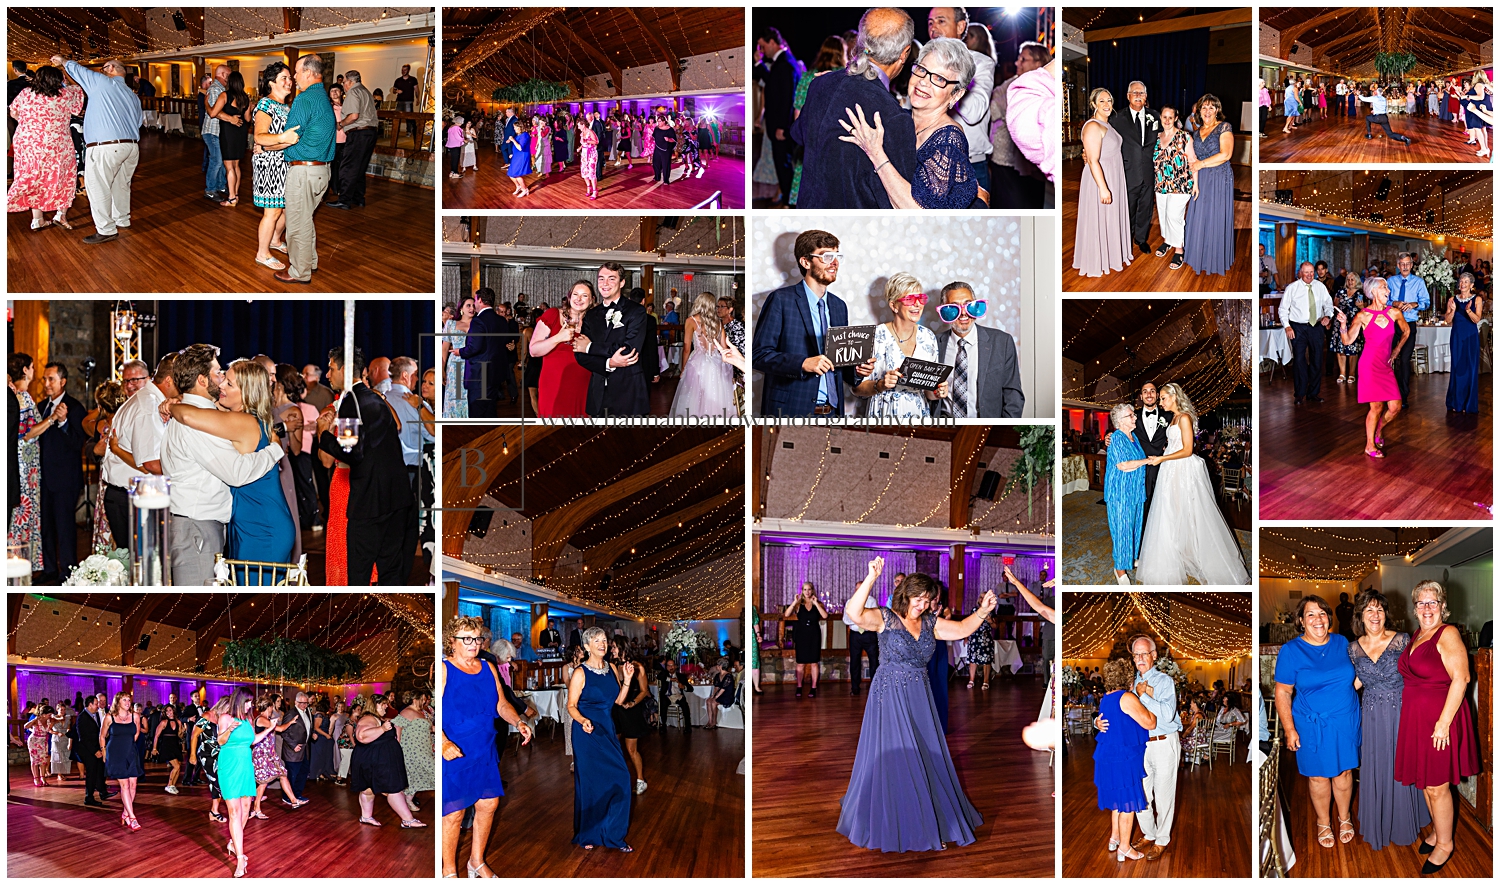 Wedding photo collage of open dancing and party dancing.